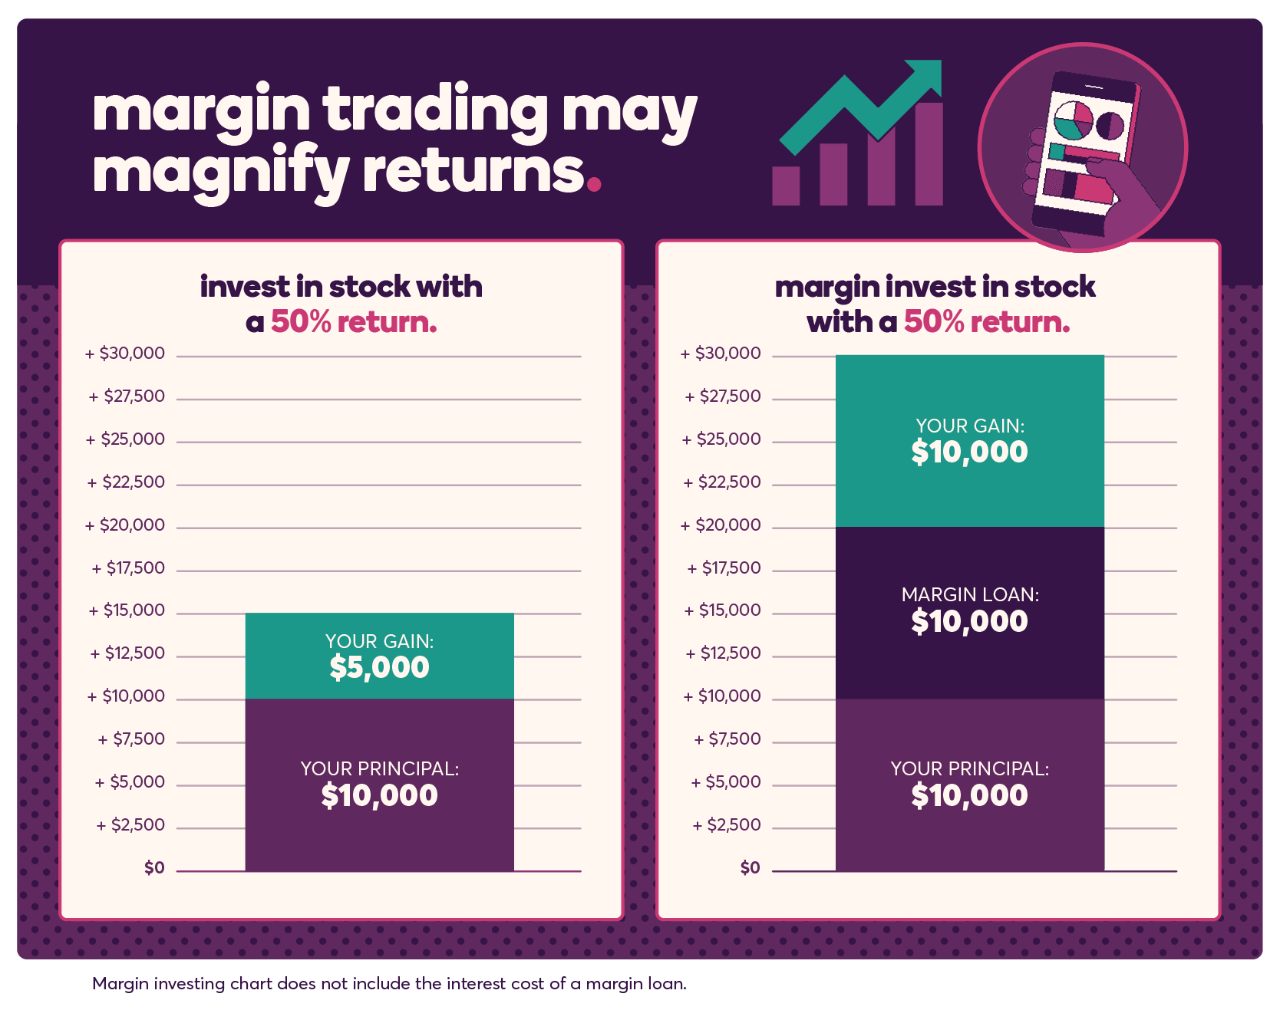 Margin trading may magnify returns. If you invest in stock with a 50% return, a principal of $10,000 will see a gain of $5,000 for a total of $15,000. If you margin invest in stock with a 50% return, a principal of $10,000, plus a margin loan of $10,000 will see a gain of $10,000 for a total of $30,000. This example does not include the interest cost of a margin loan.